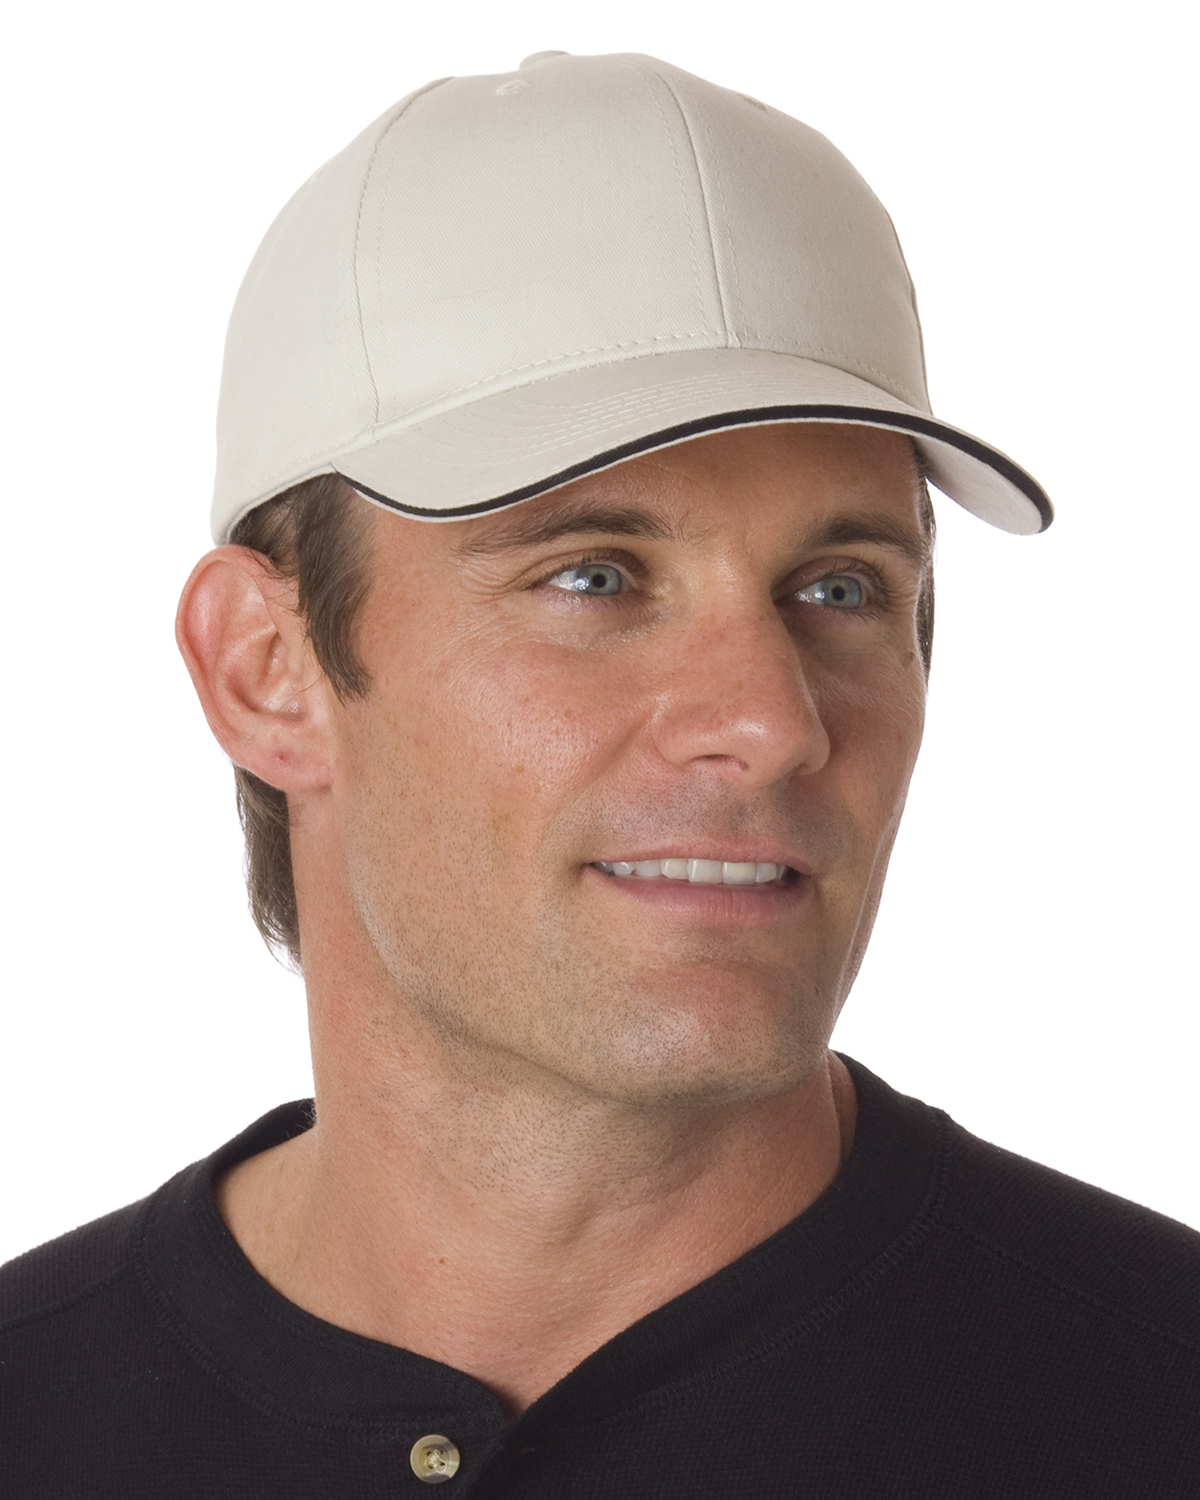 Bayside BA3621 - Brushed Twill Structured Sandwich Cap